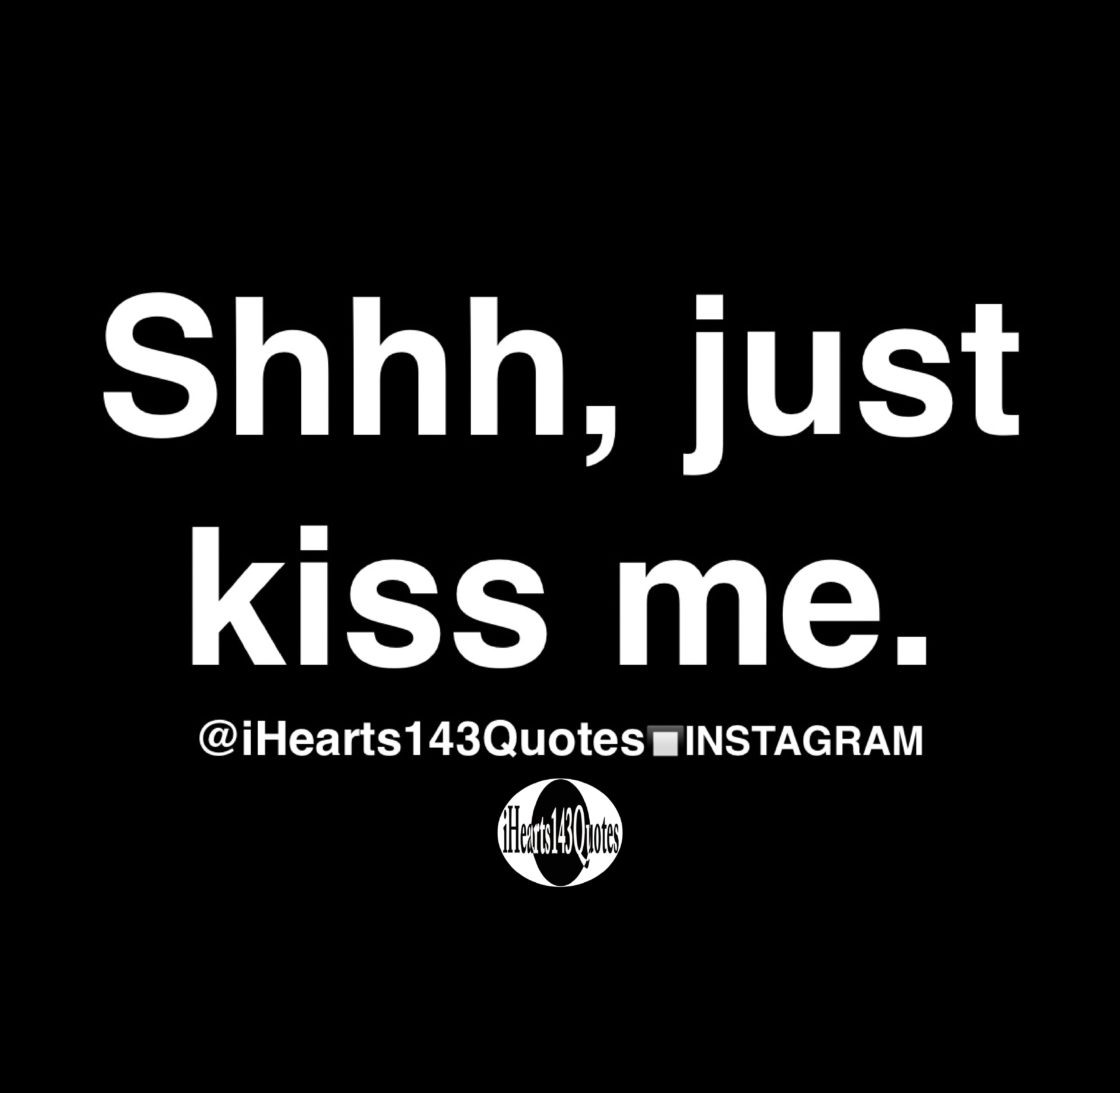 Shhh, just kiss me - Quotes - iHearts143Quotes